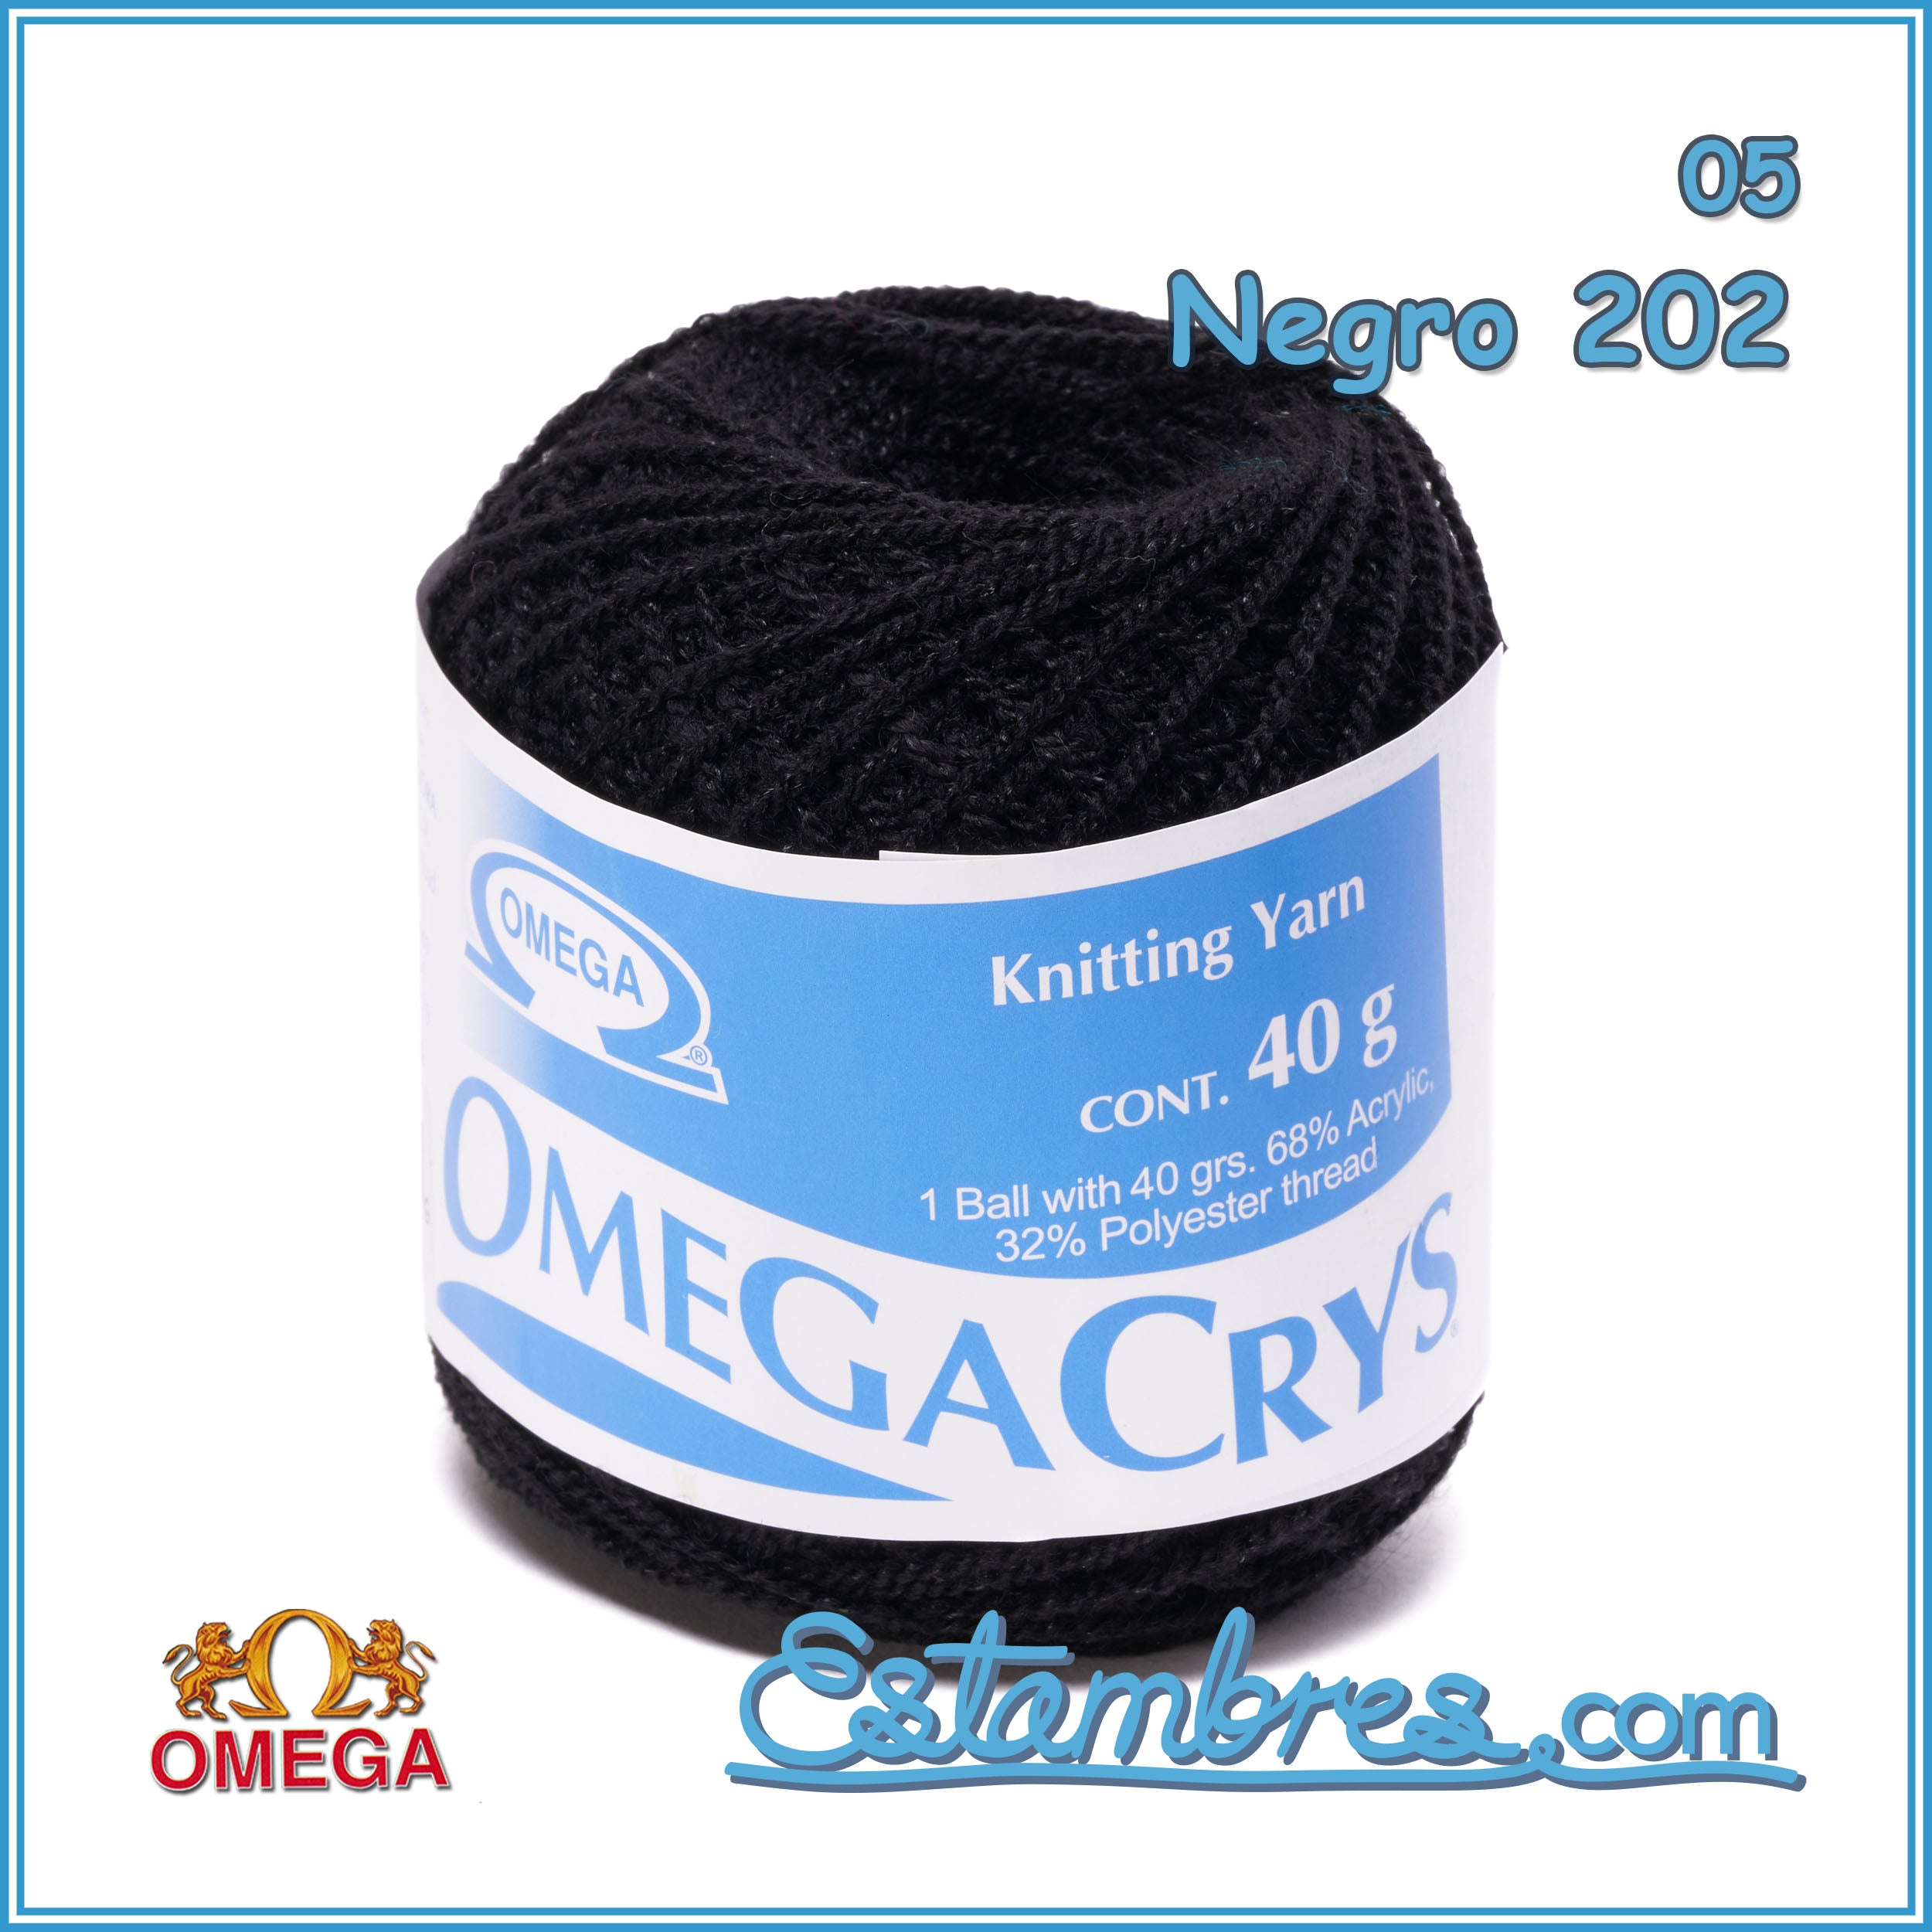 OMEGACRYS [40grs] - 1 of 2